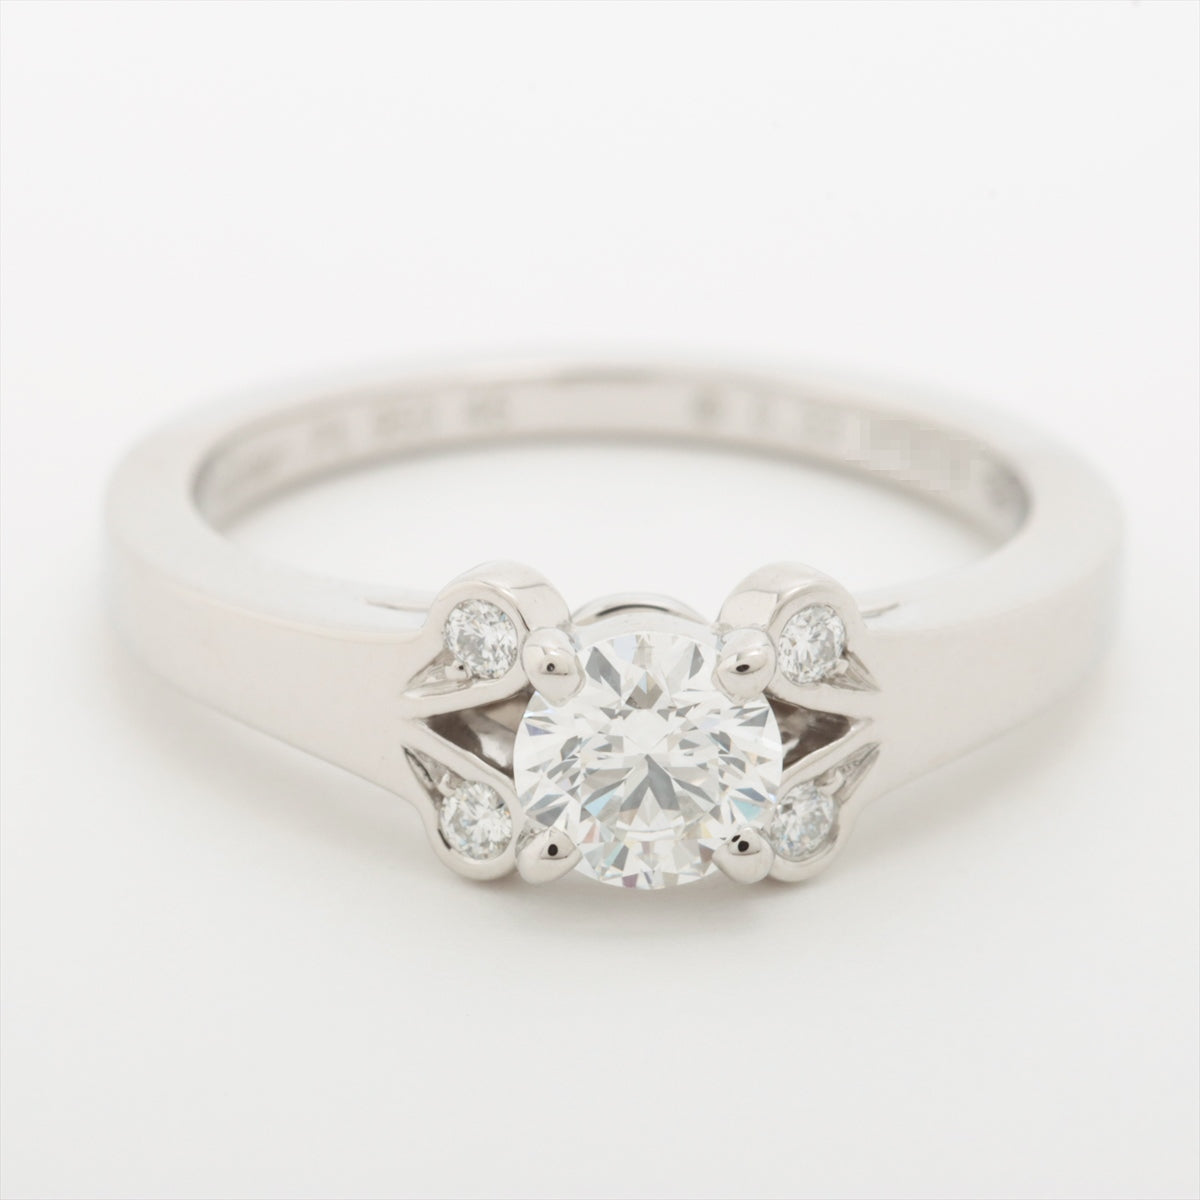 Cartier Ballerina Diamond Ring Pt950 4.4g 0.33 F VVS1 EX NONE 46 Published by GIA in 2012 CRN4197646